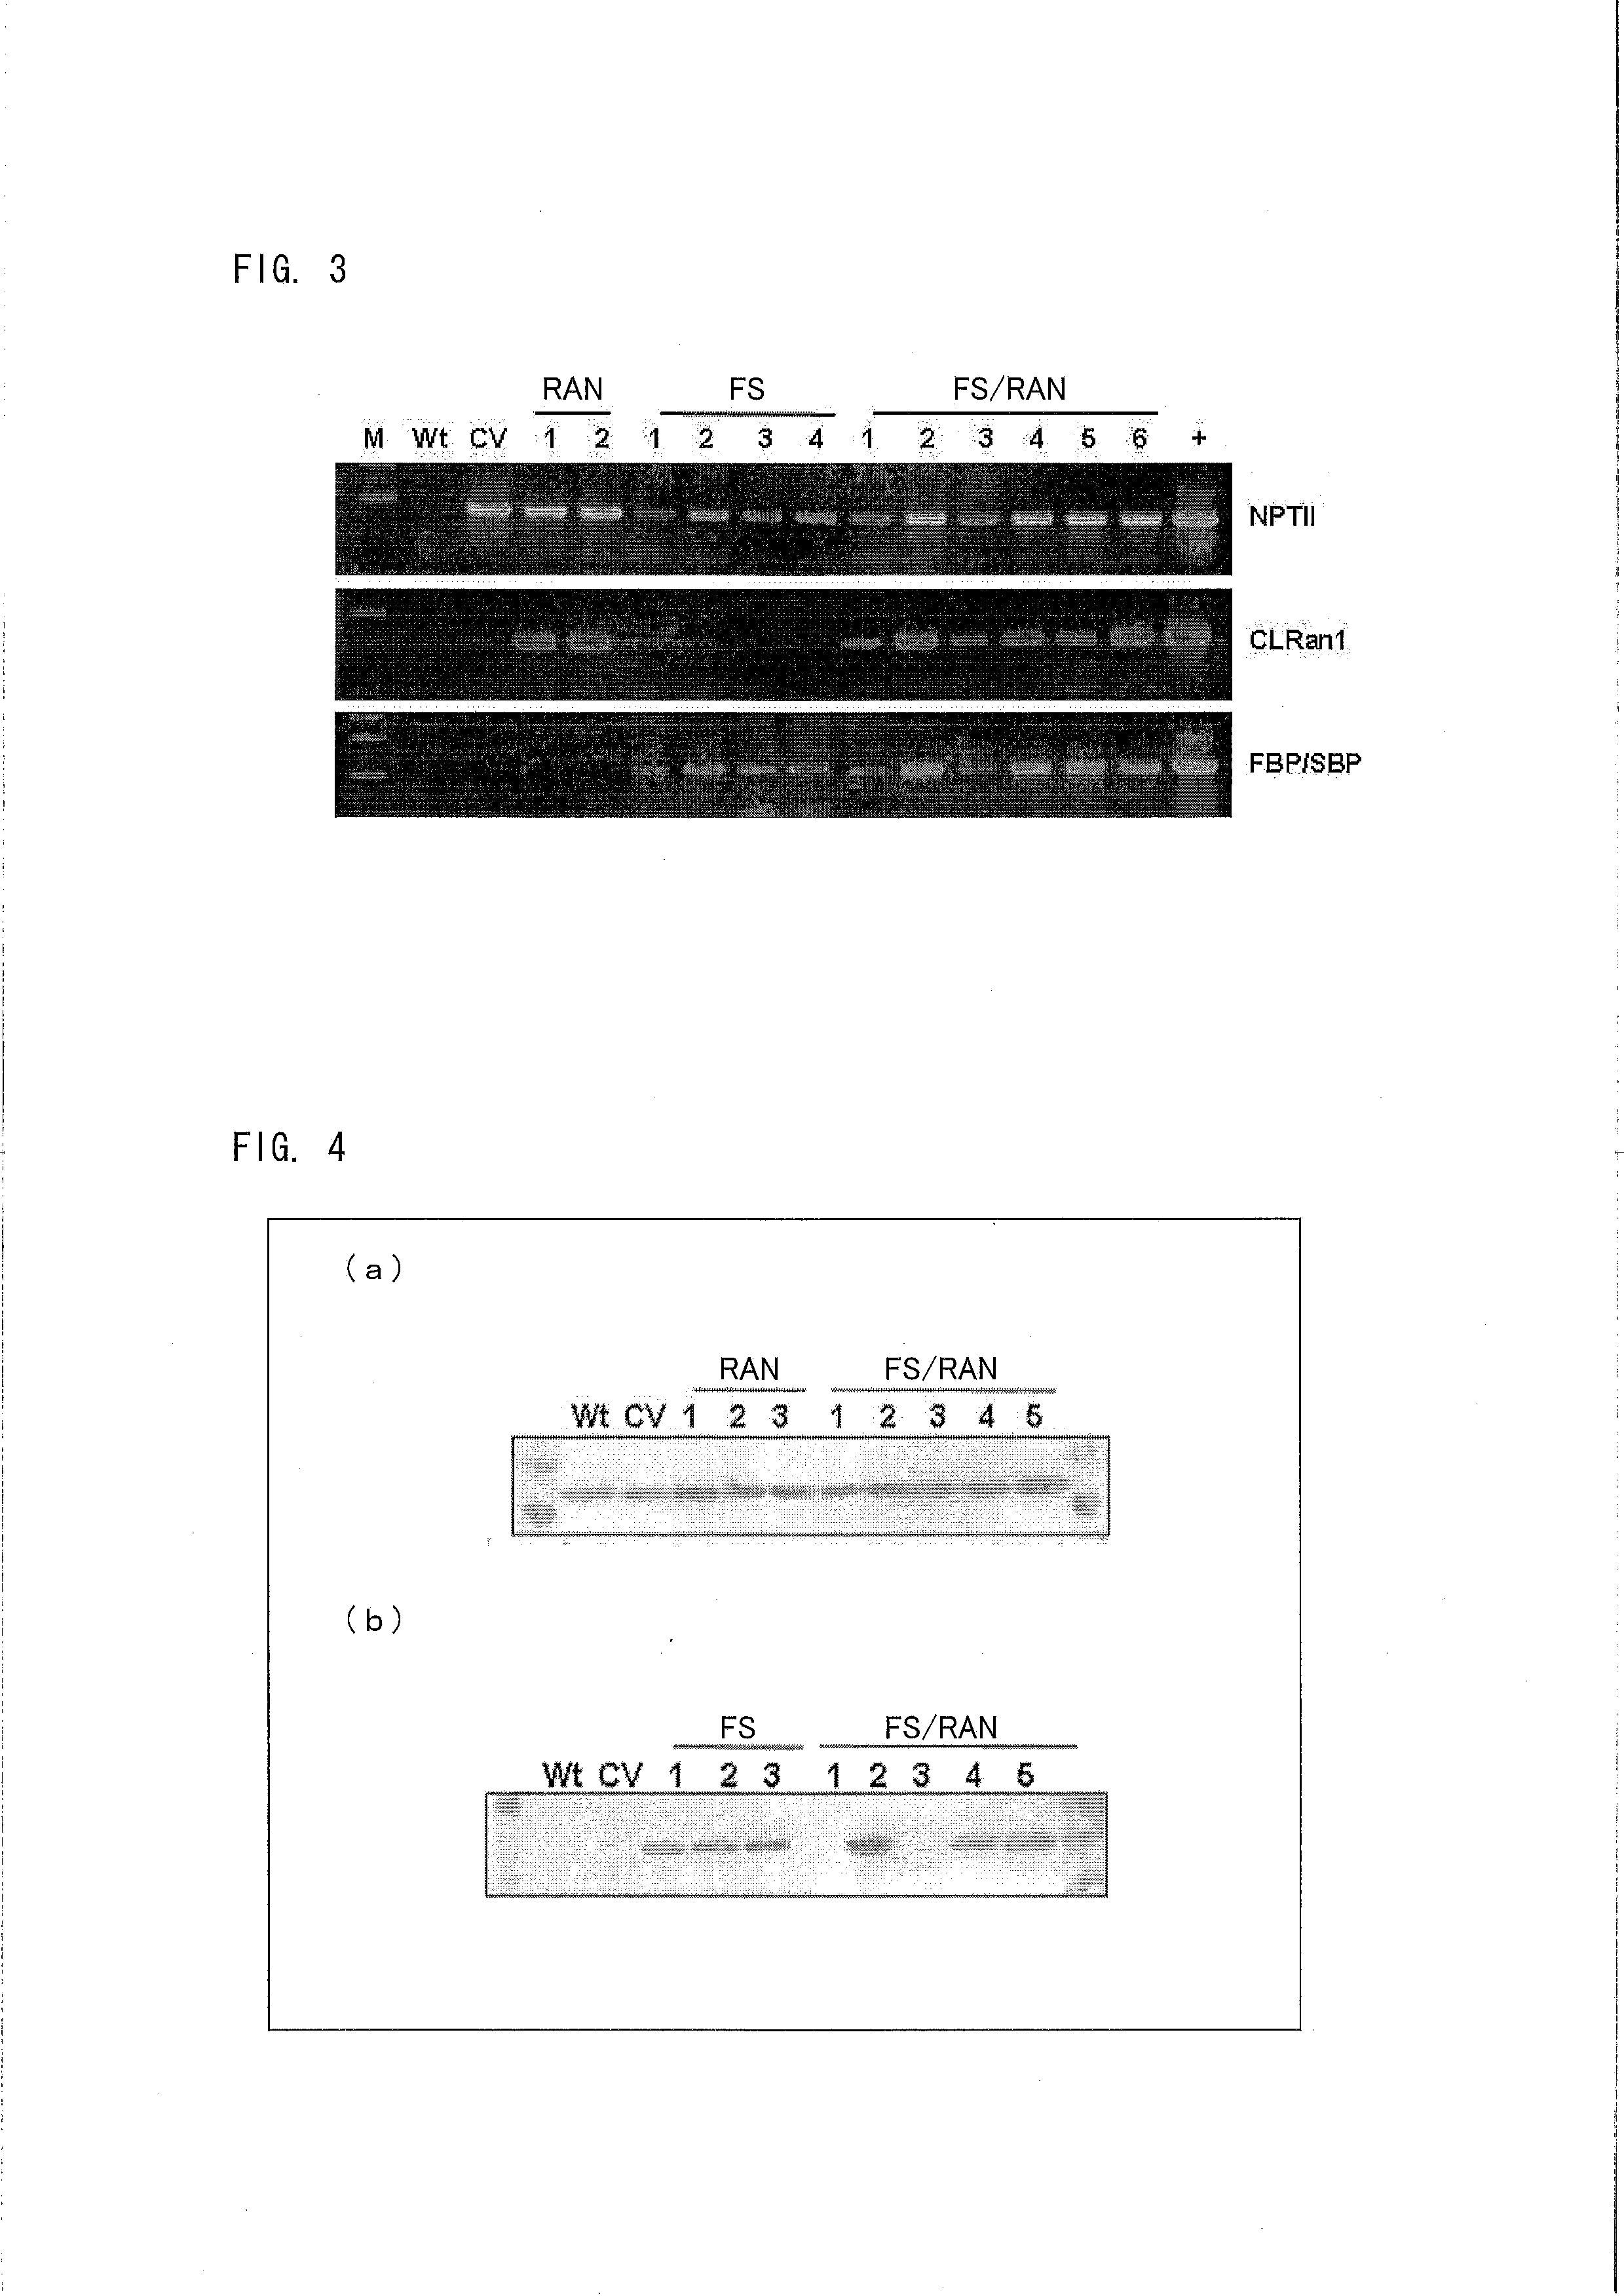 Method for production of stolon-forming plant having improved tuber production ability or stolon production ability compared with wild type, and stolon-forming plant produced by the method